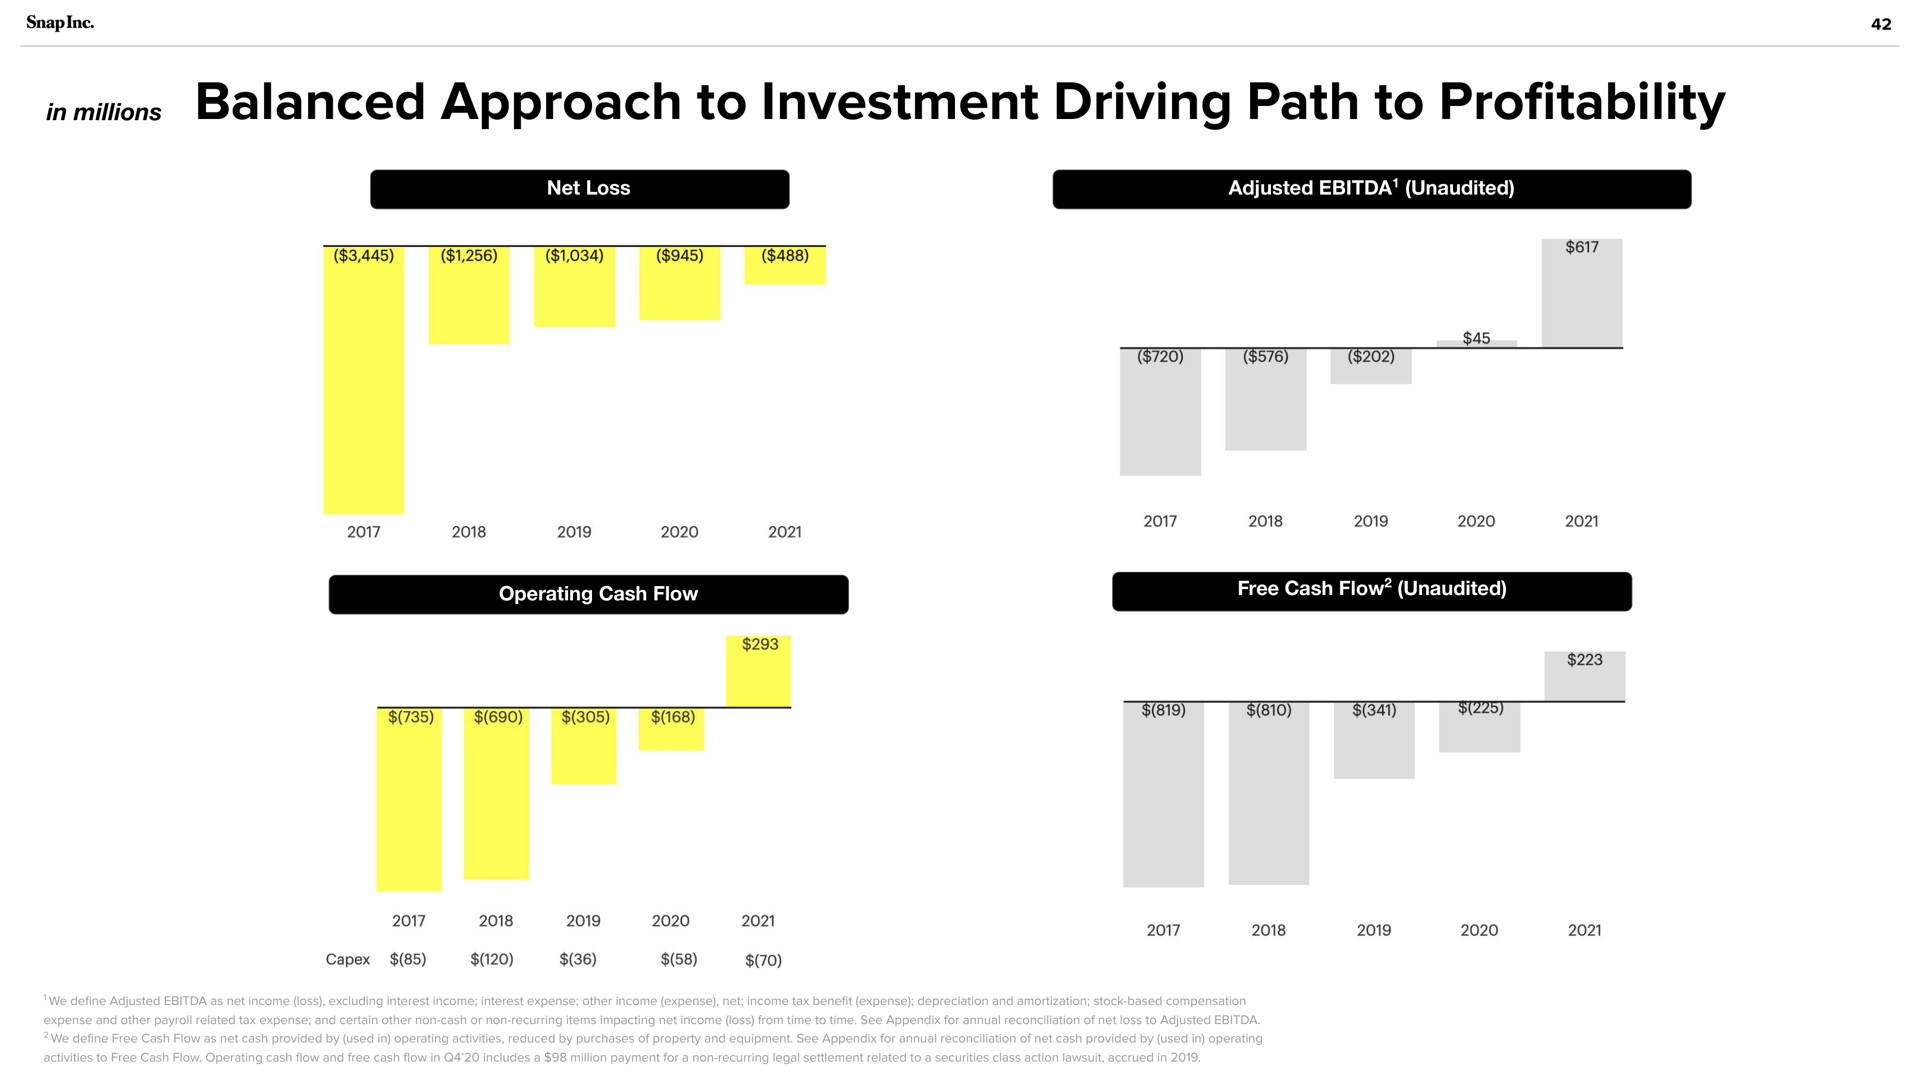 balanced approach to investment driving path to pro profitability | Snap Inc